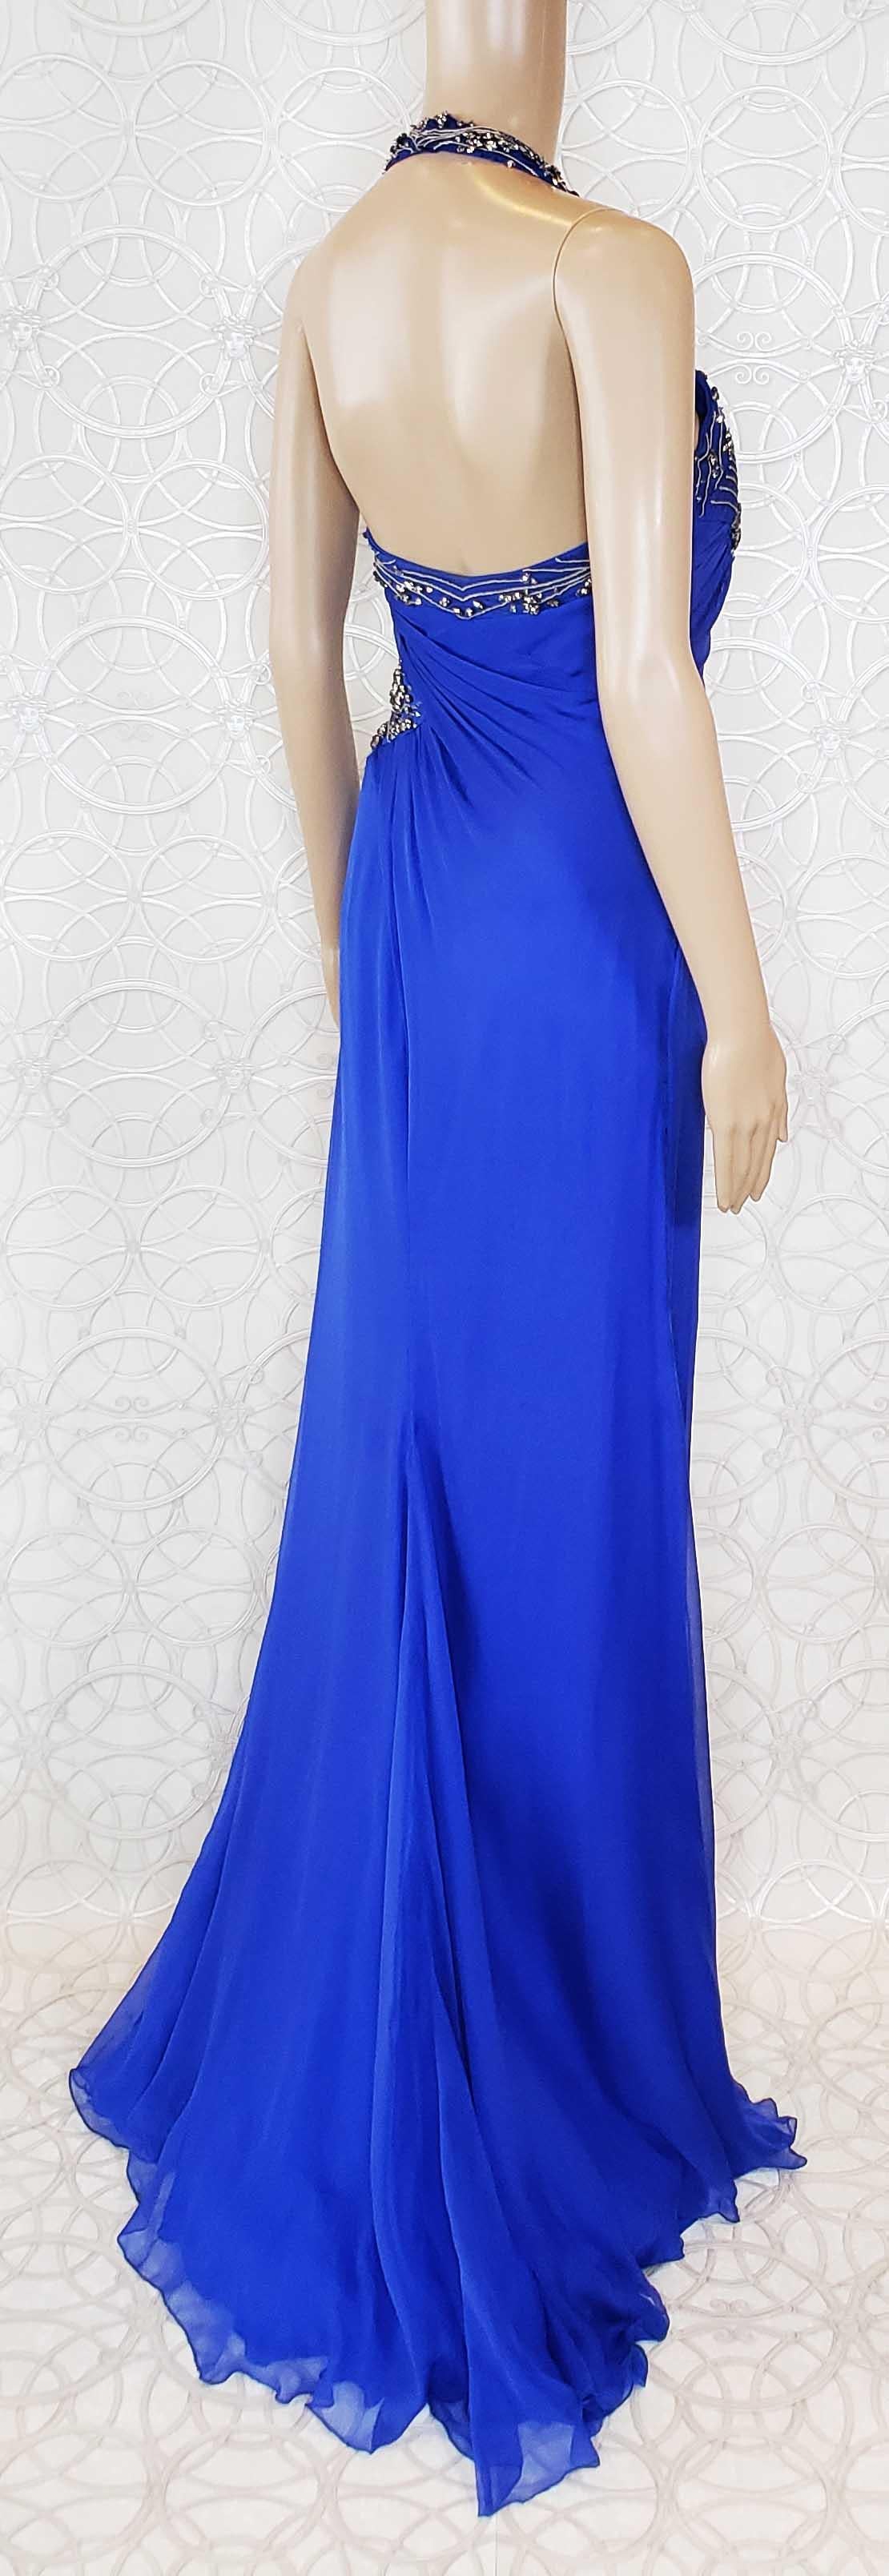 F/W 2009 NEW VERSACE BLUE SILK EMBROIDERED HALTER Gown 42 - 6 For Sale 4